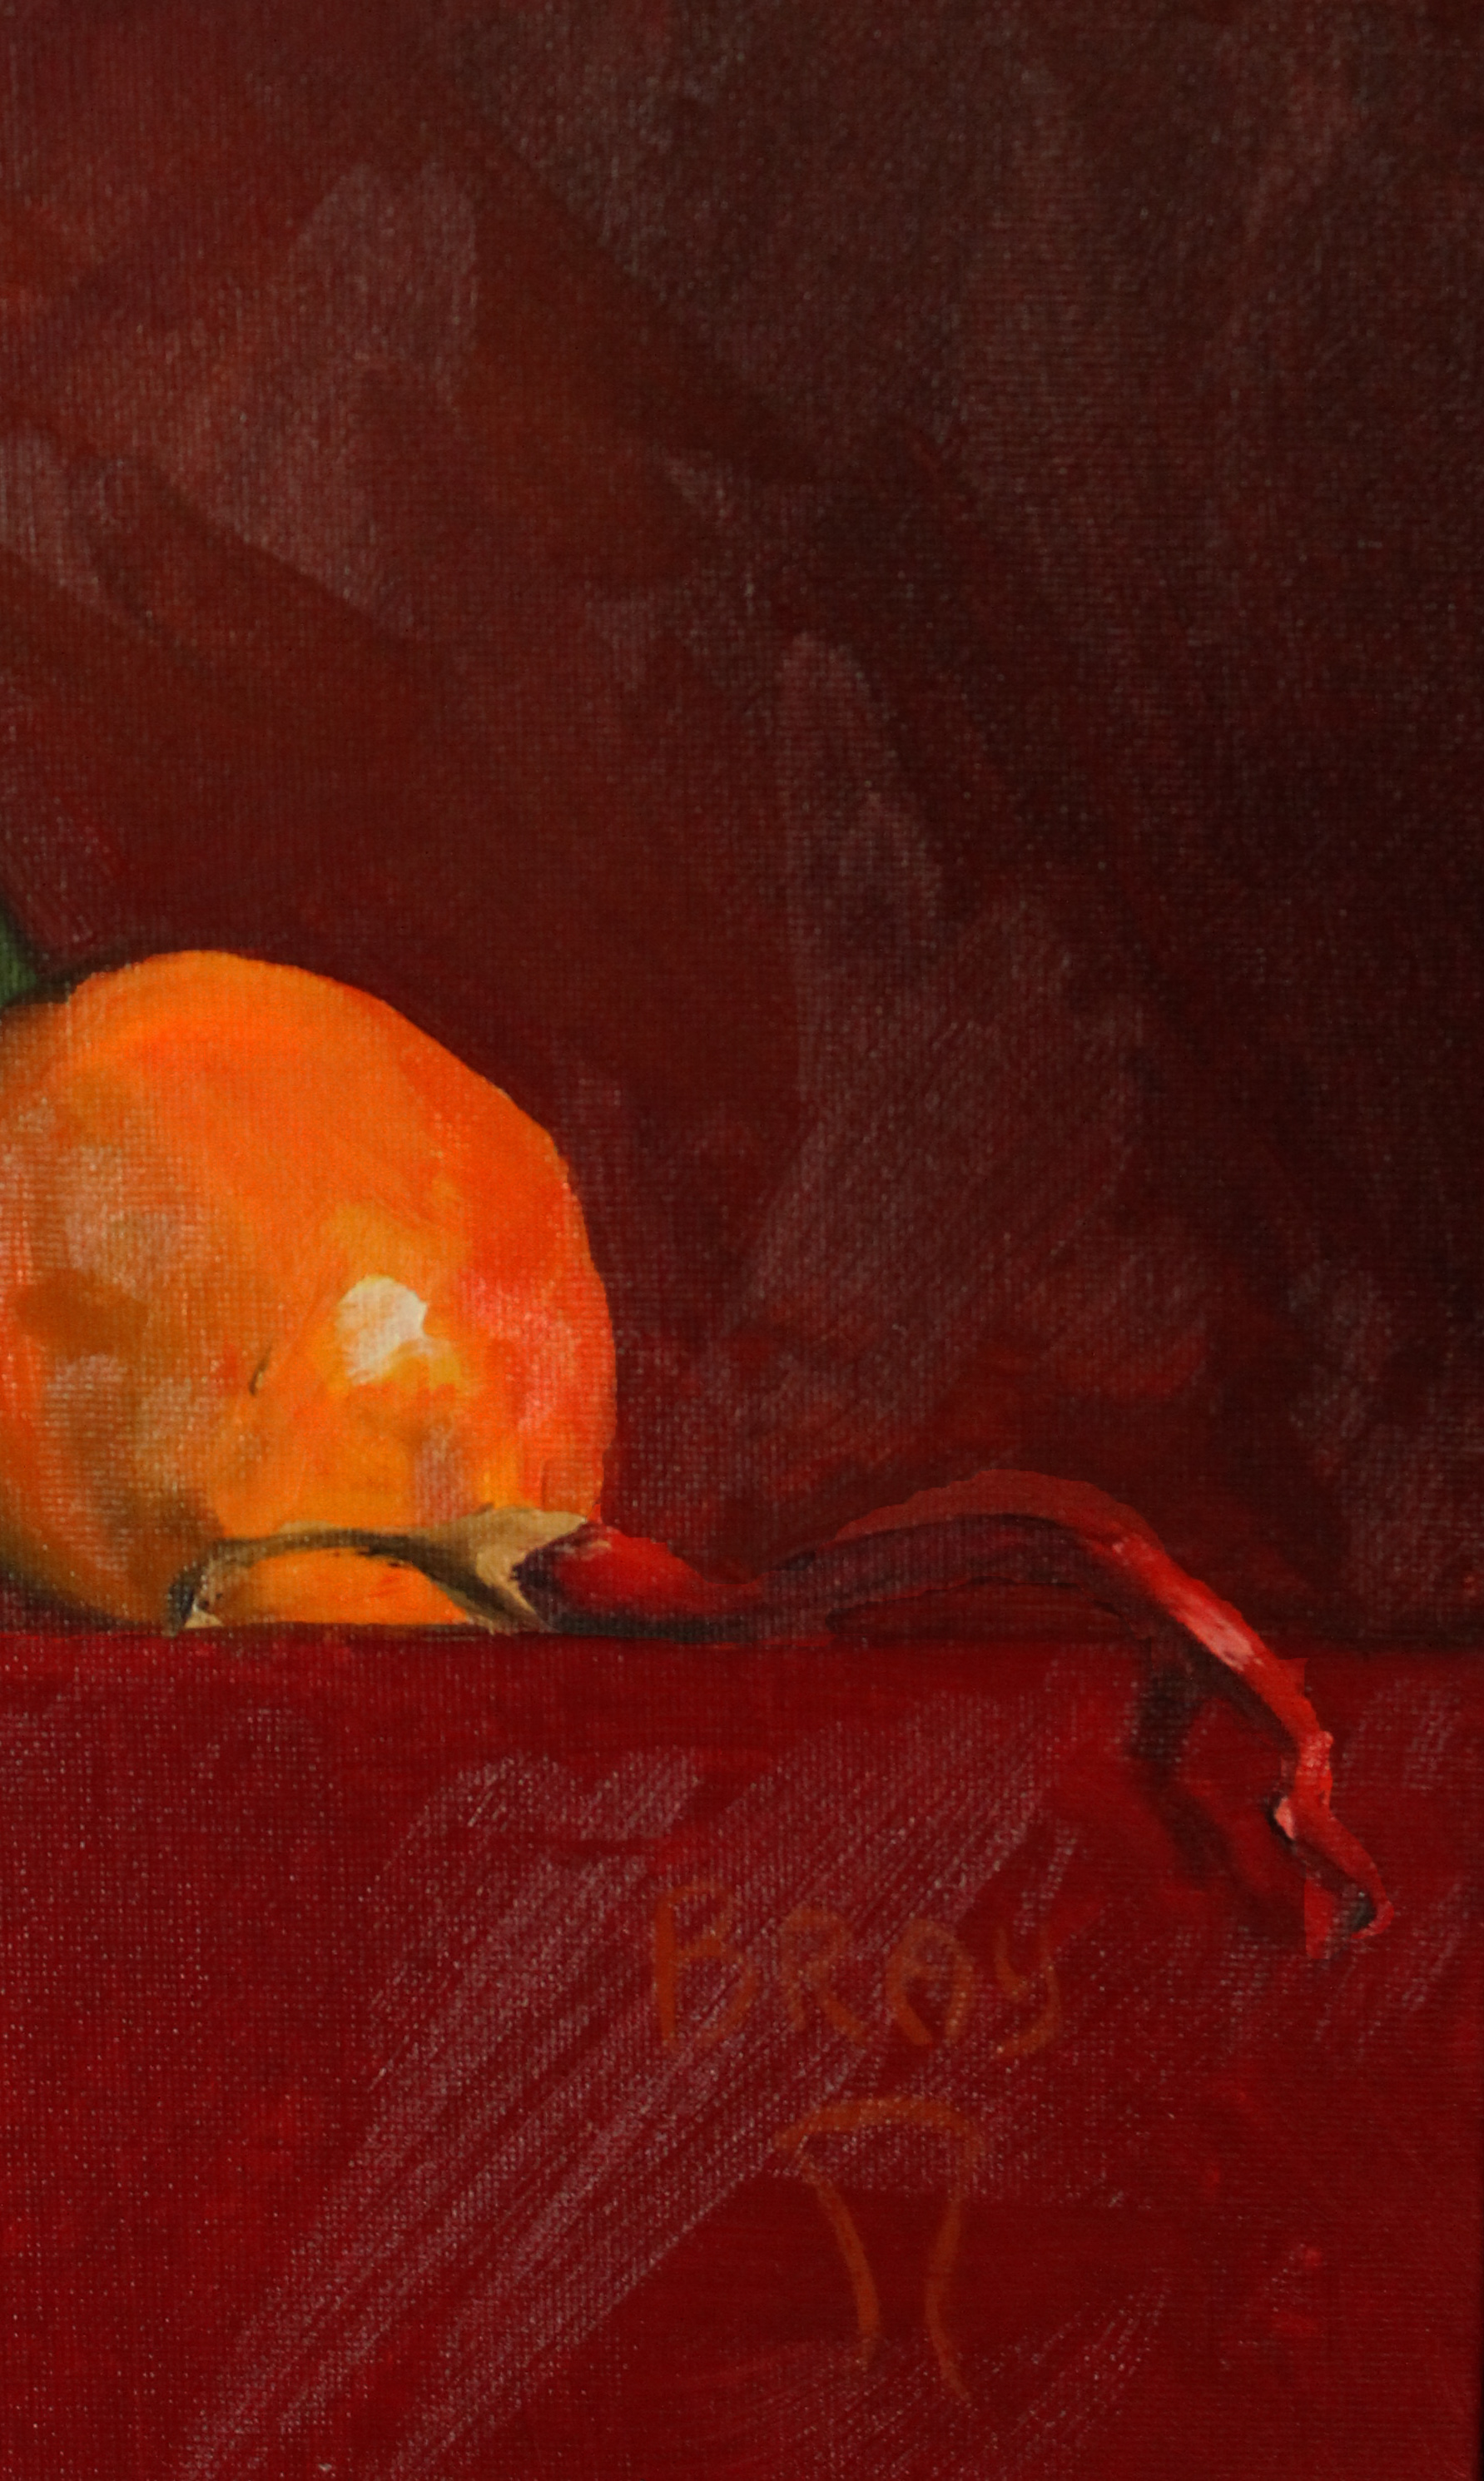 Oil painting of a red pepper on a ledge against a dark red background by Sandra Bray